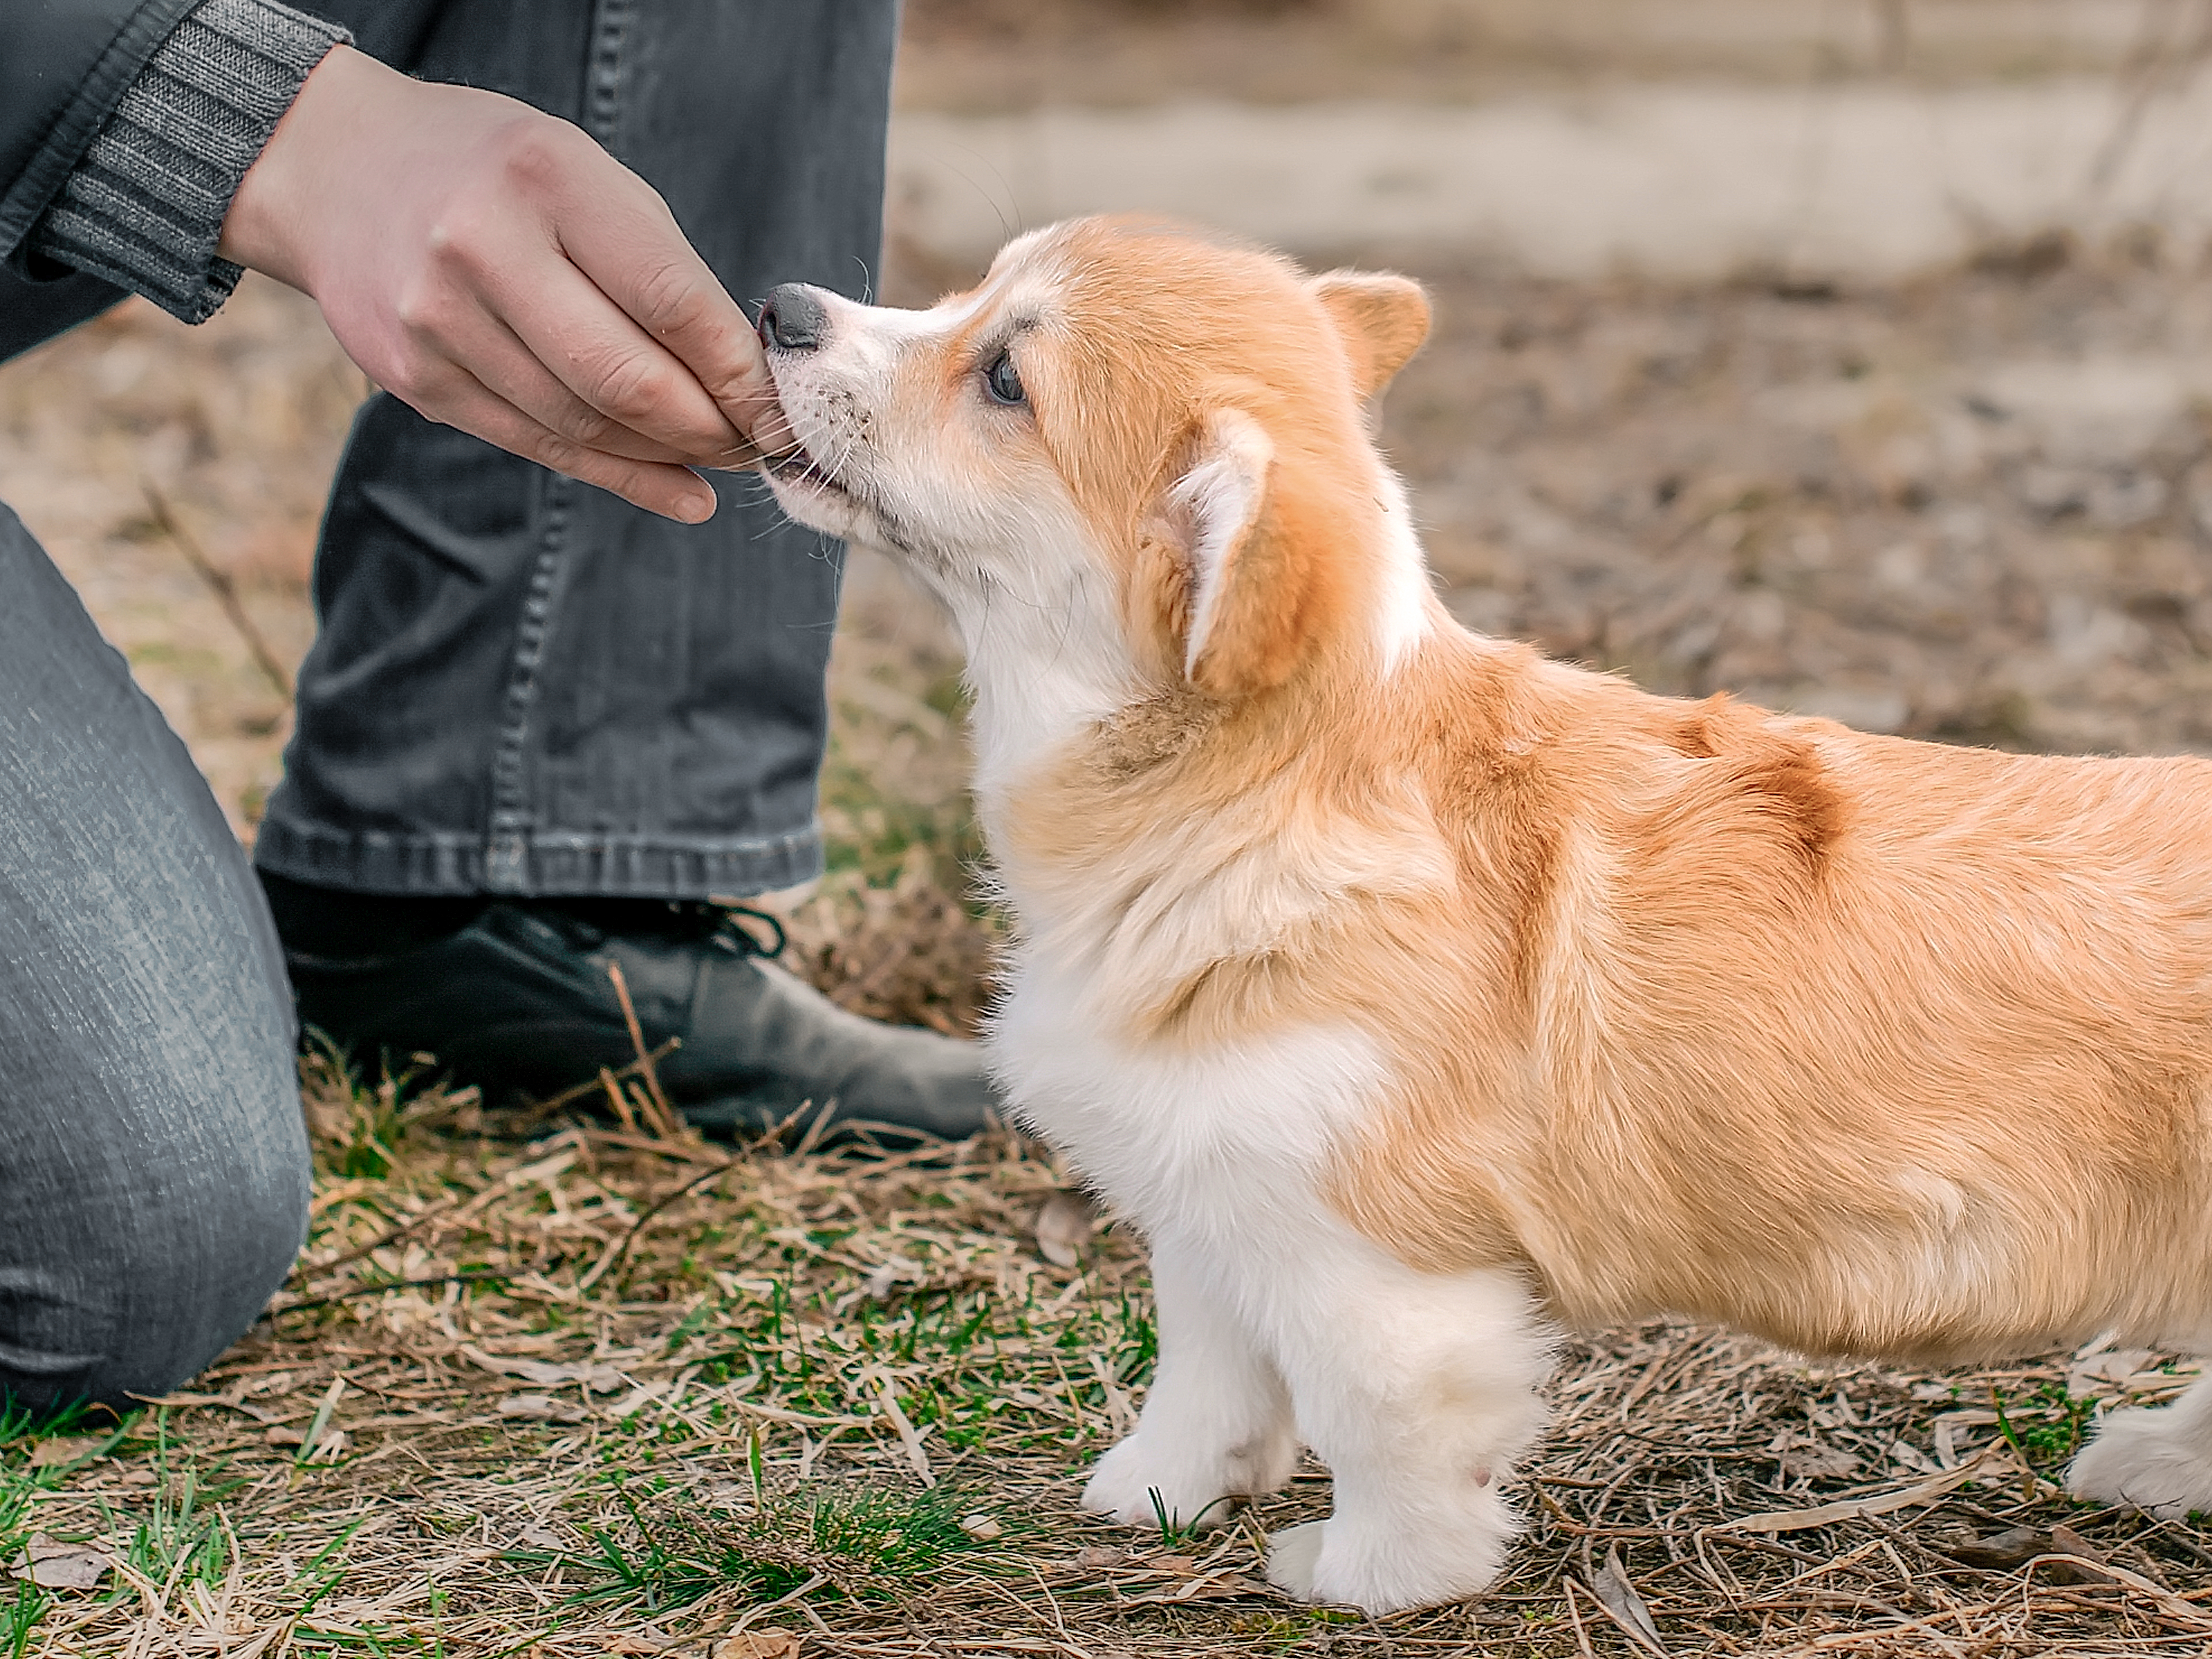 Pembroke Welsh Corgi puppy standing outside being given a treat